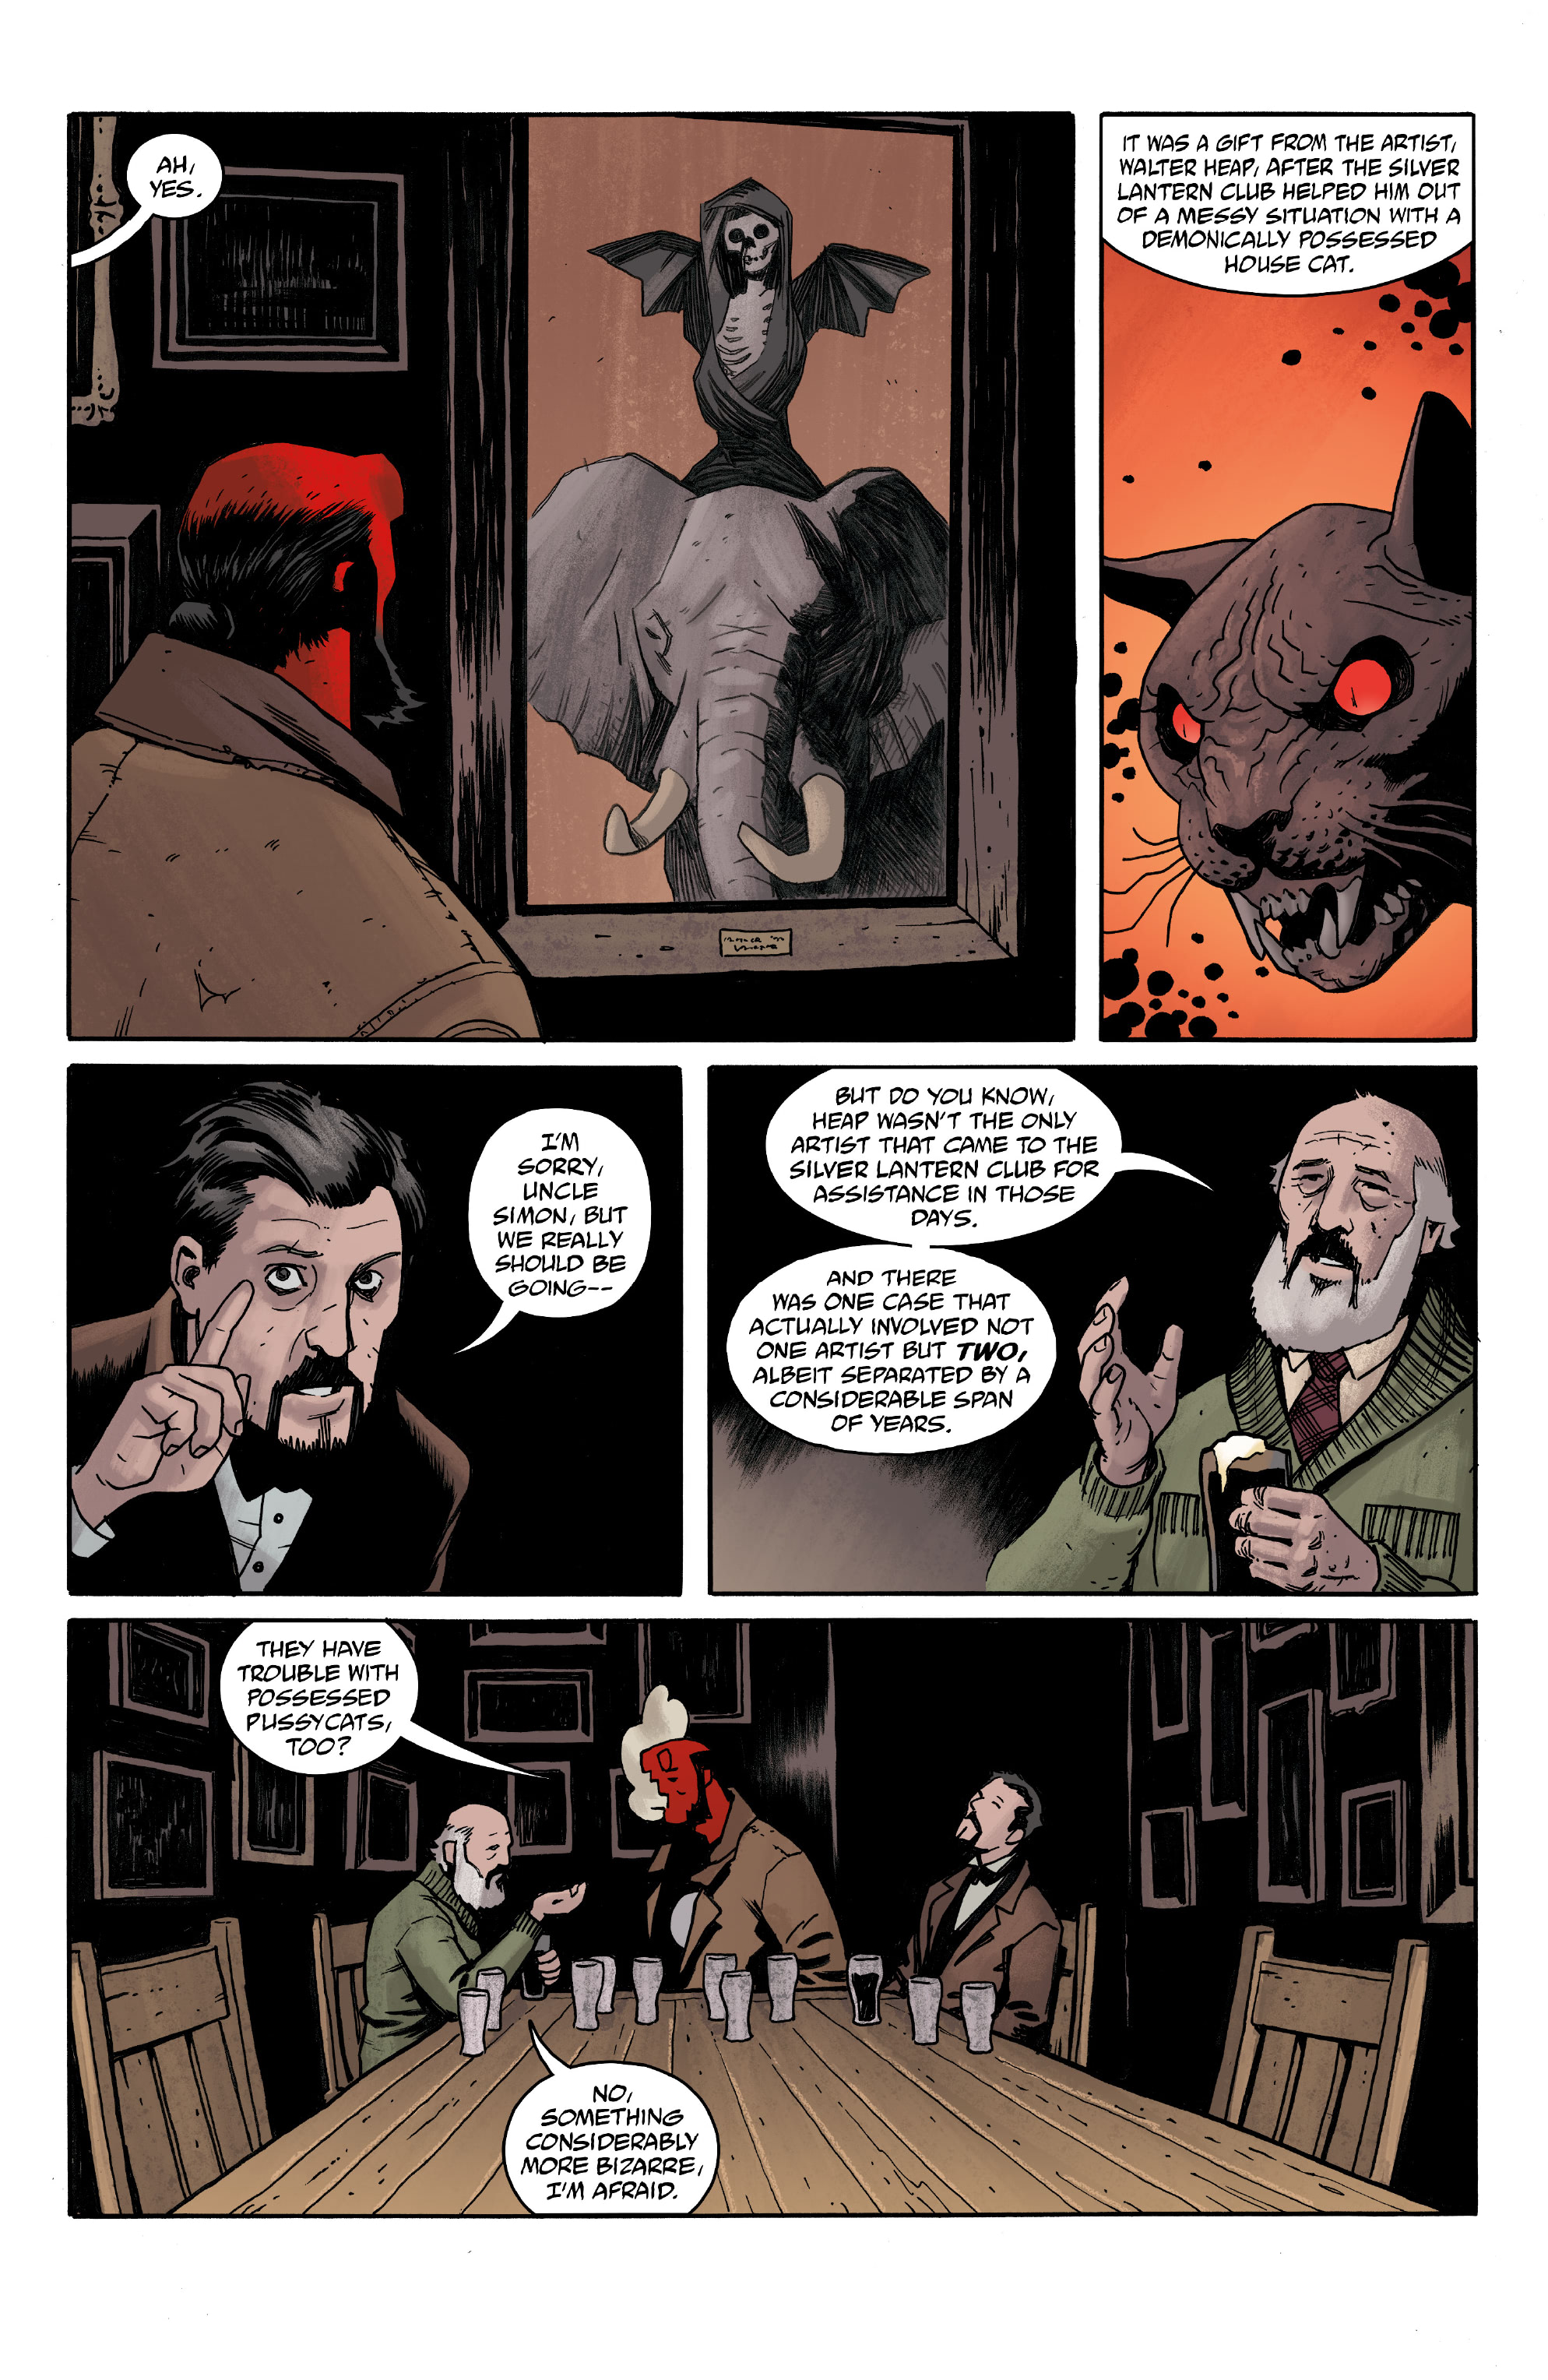 Hellboy: The Silver Lantern Club (2021-): Chapter 3 - Page 4